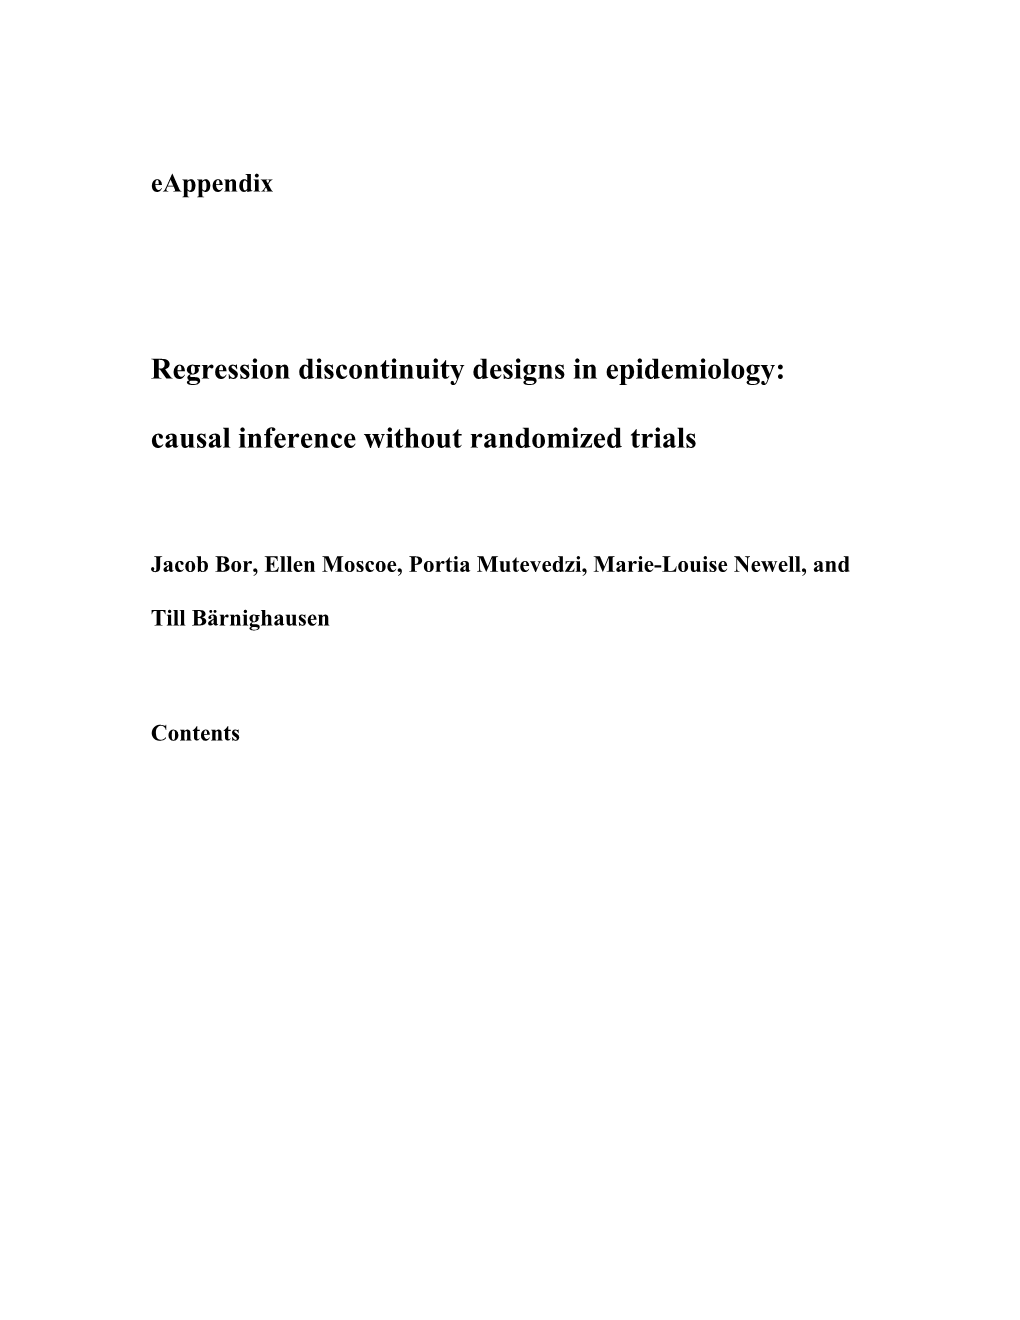 Regression Discontinuity Designs in Epidemiology: Causal Inference Without Randomized Trials